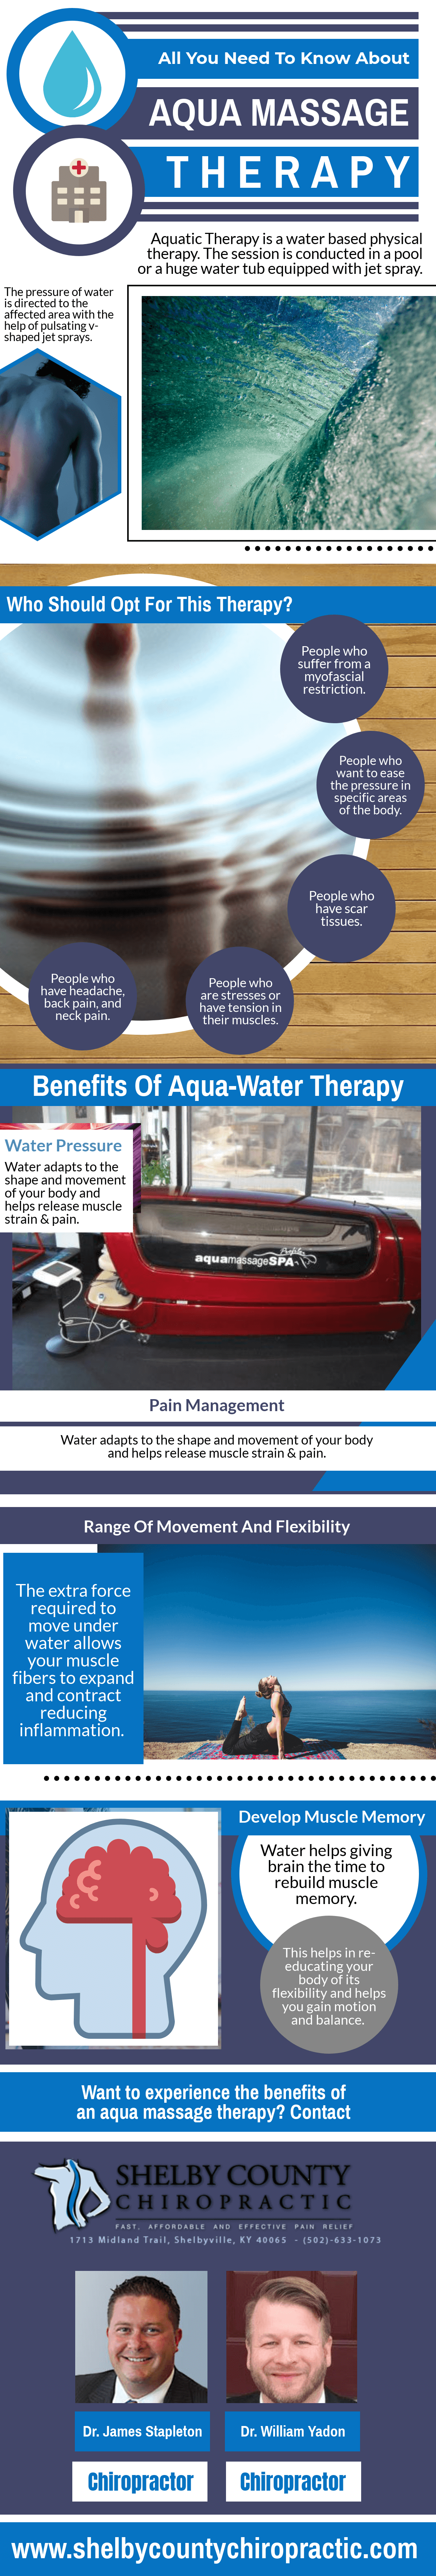 All You Need To Know About About Aqua Massage Therapy